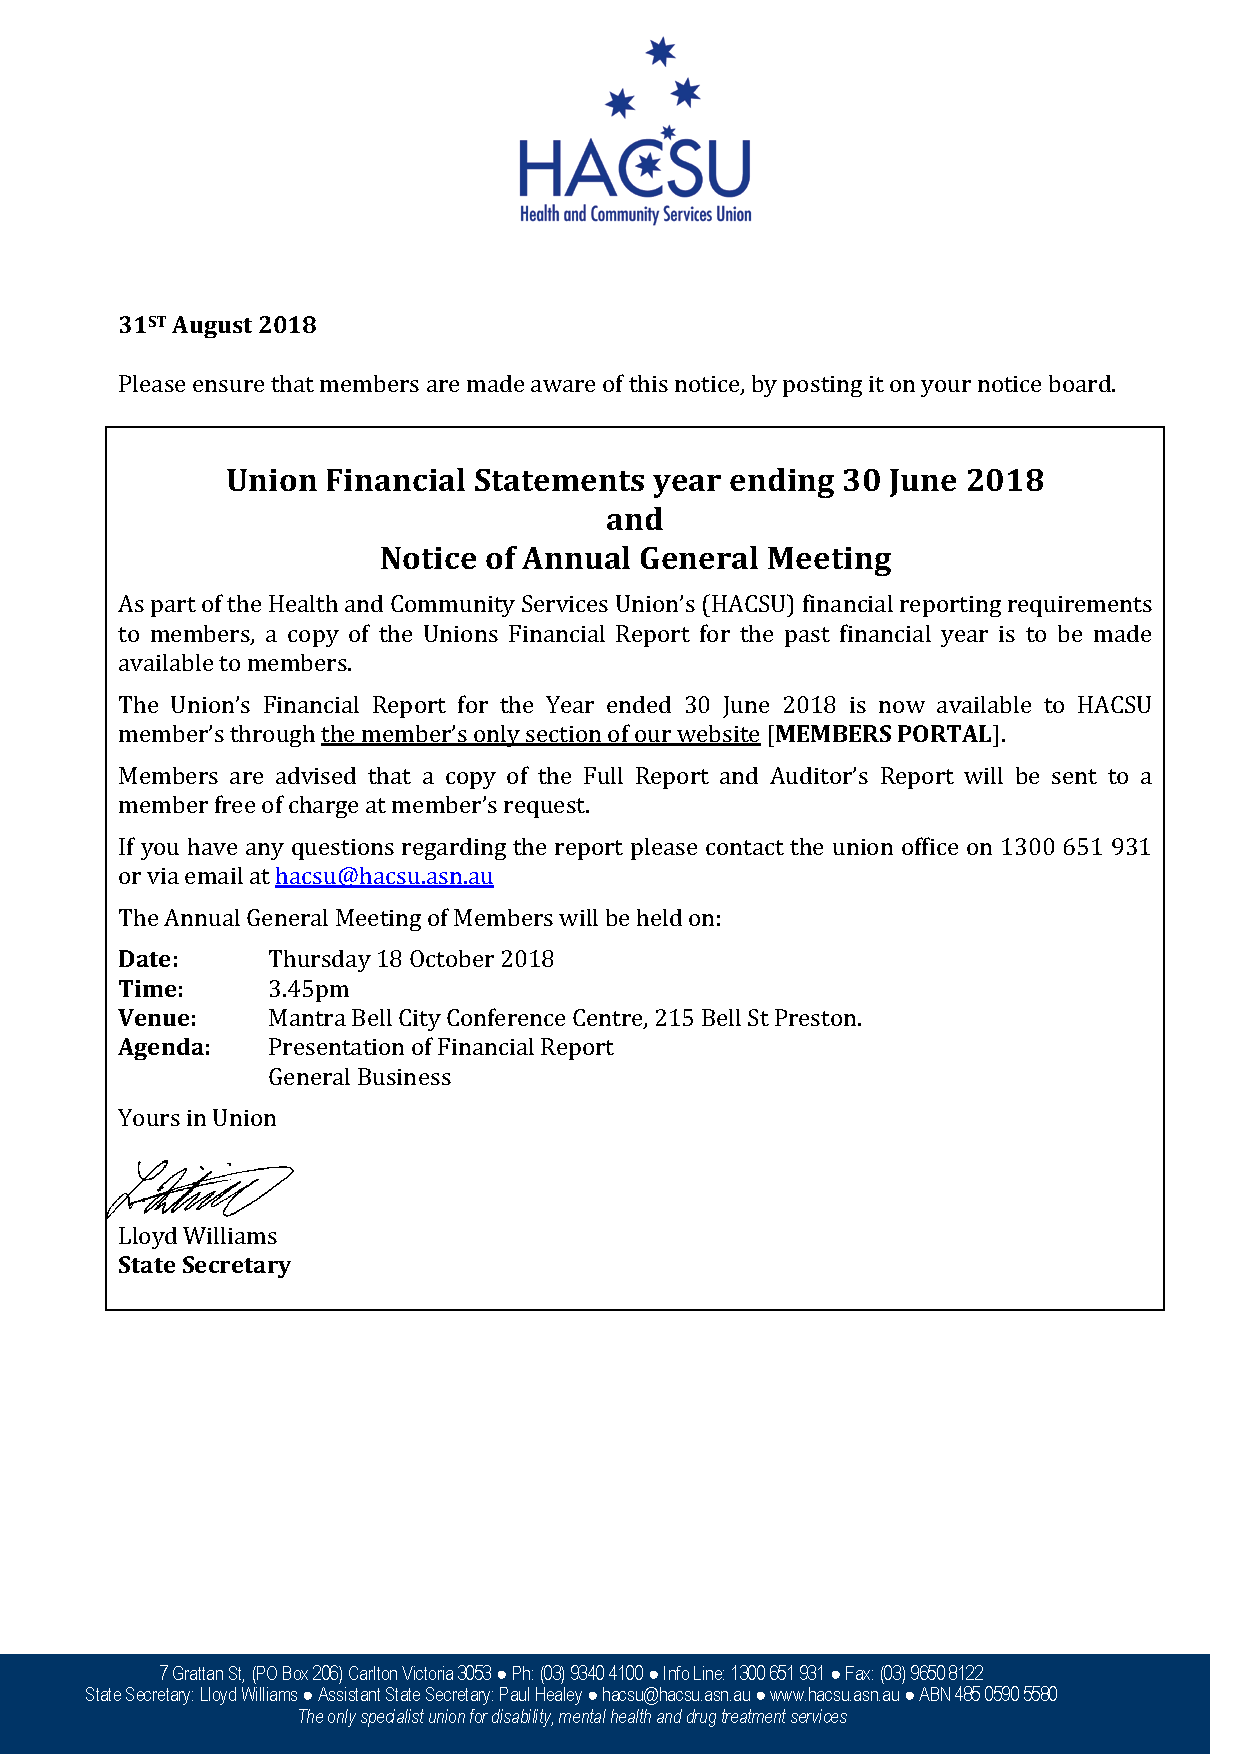 Fin Report and AGM Notice 2018 to delegates